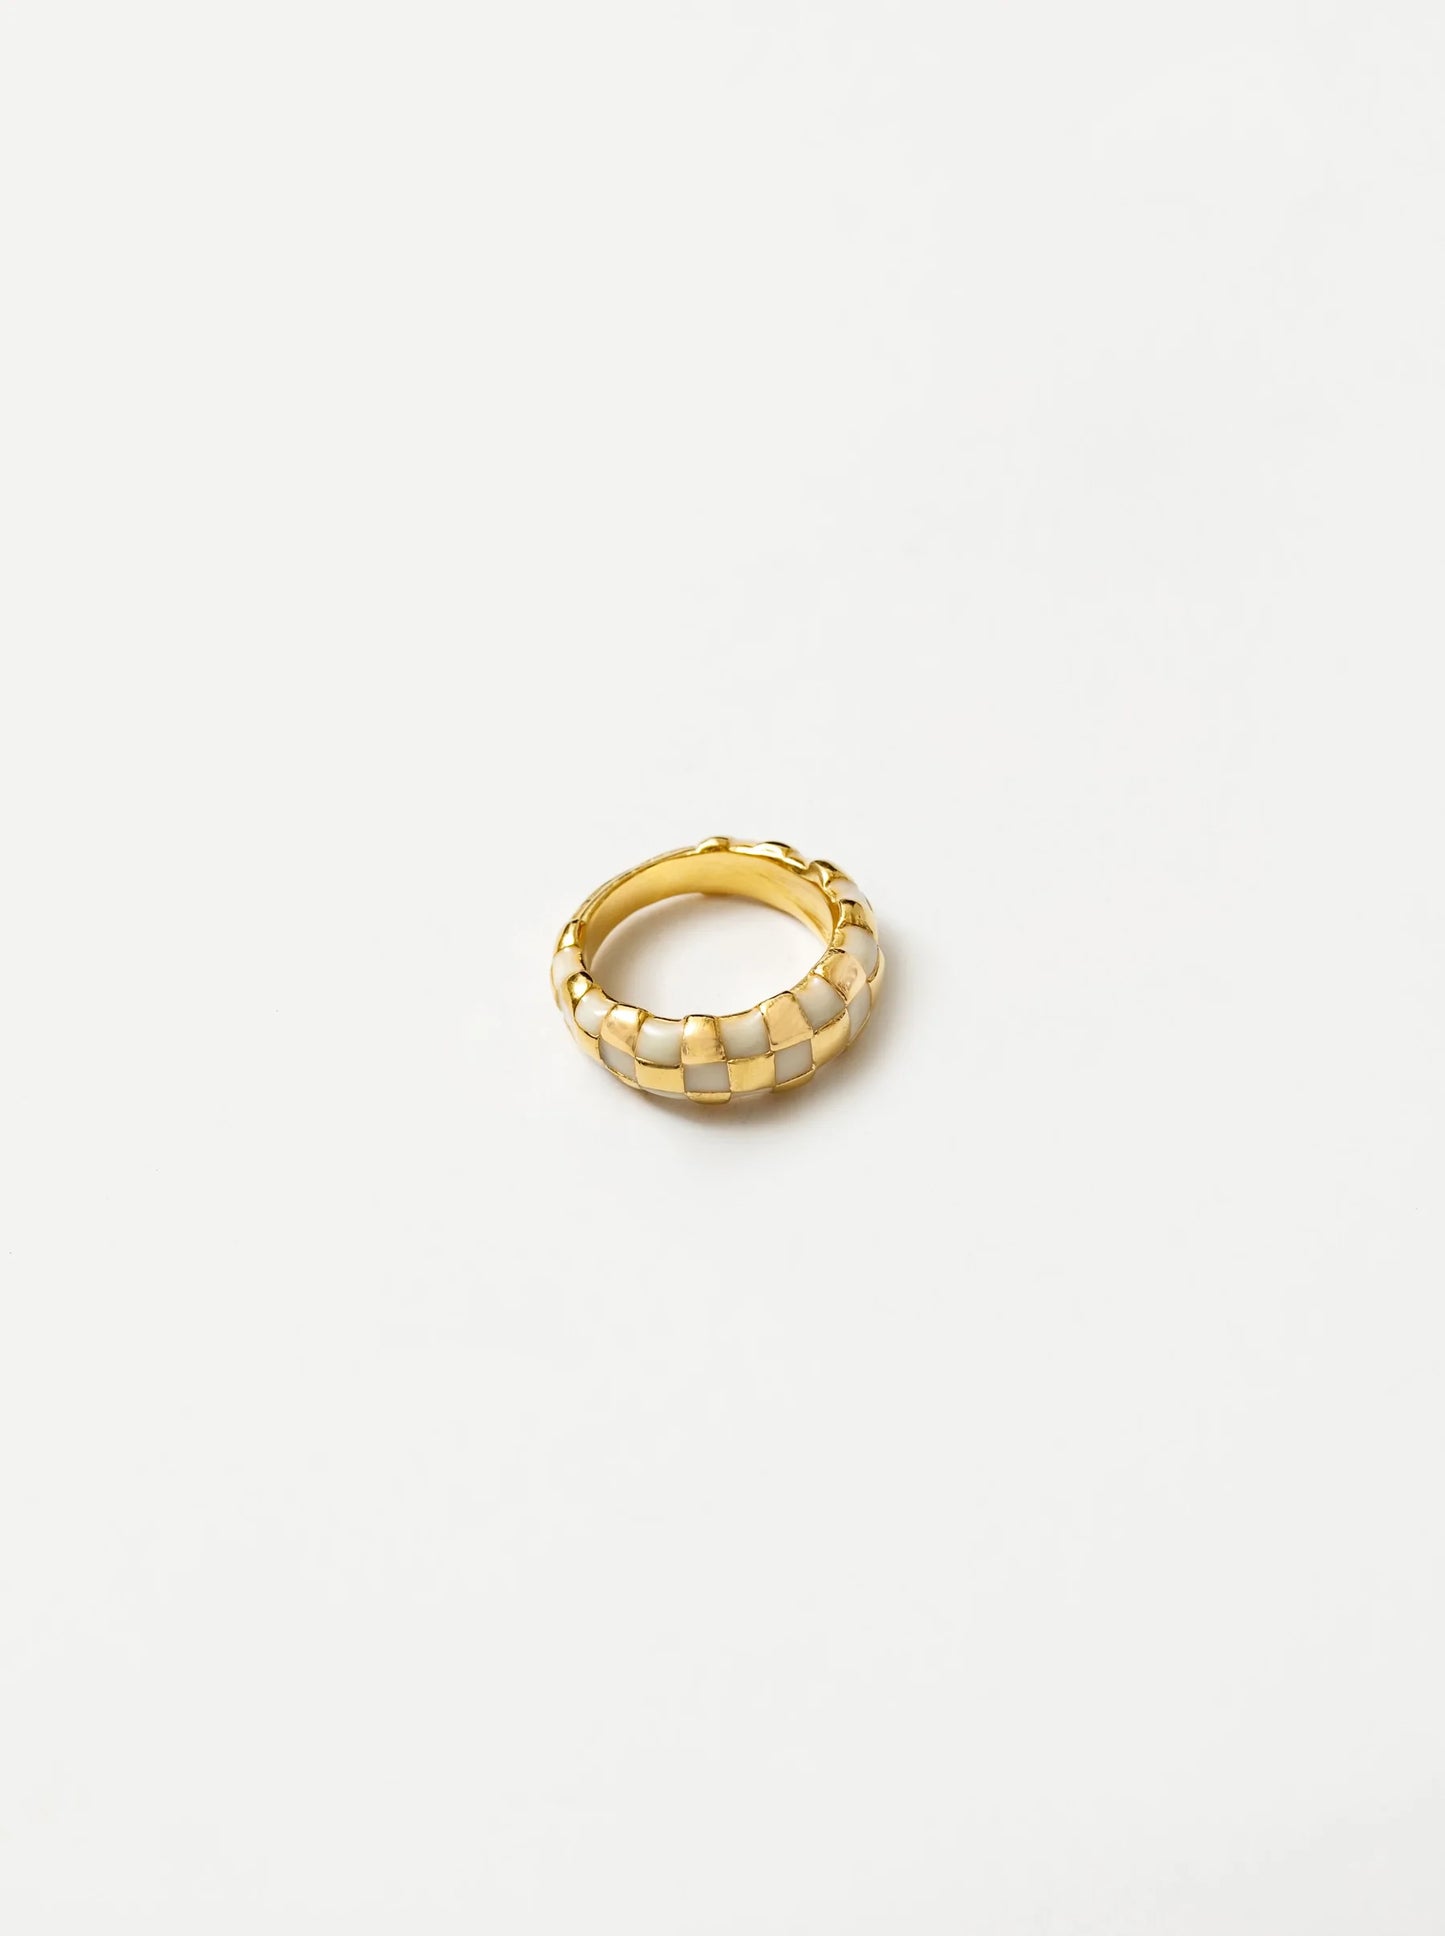 Libby Ring in Gold/Cream sz 7